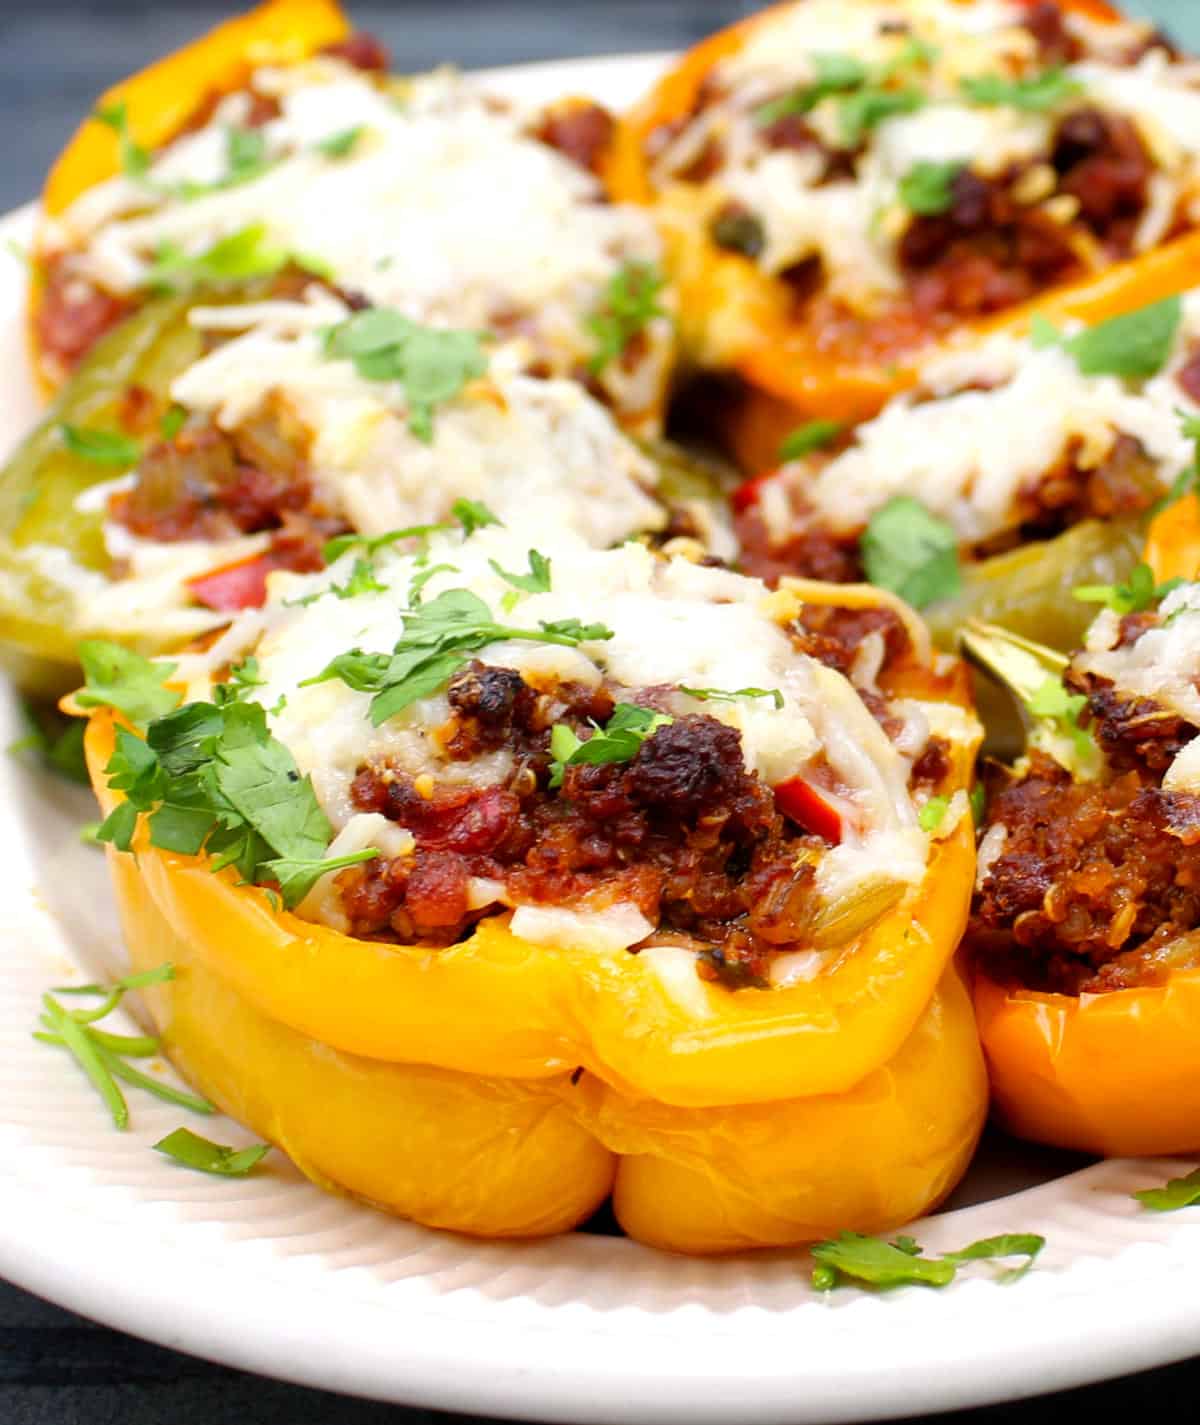 Stuffed bell peppers with parsley garnish on oval plate.